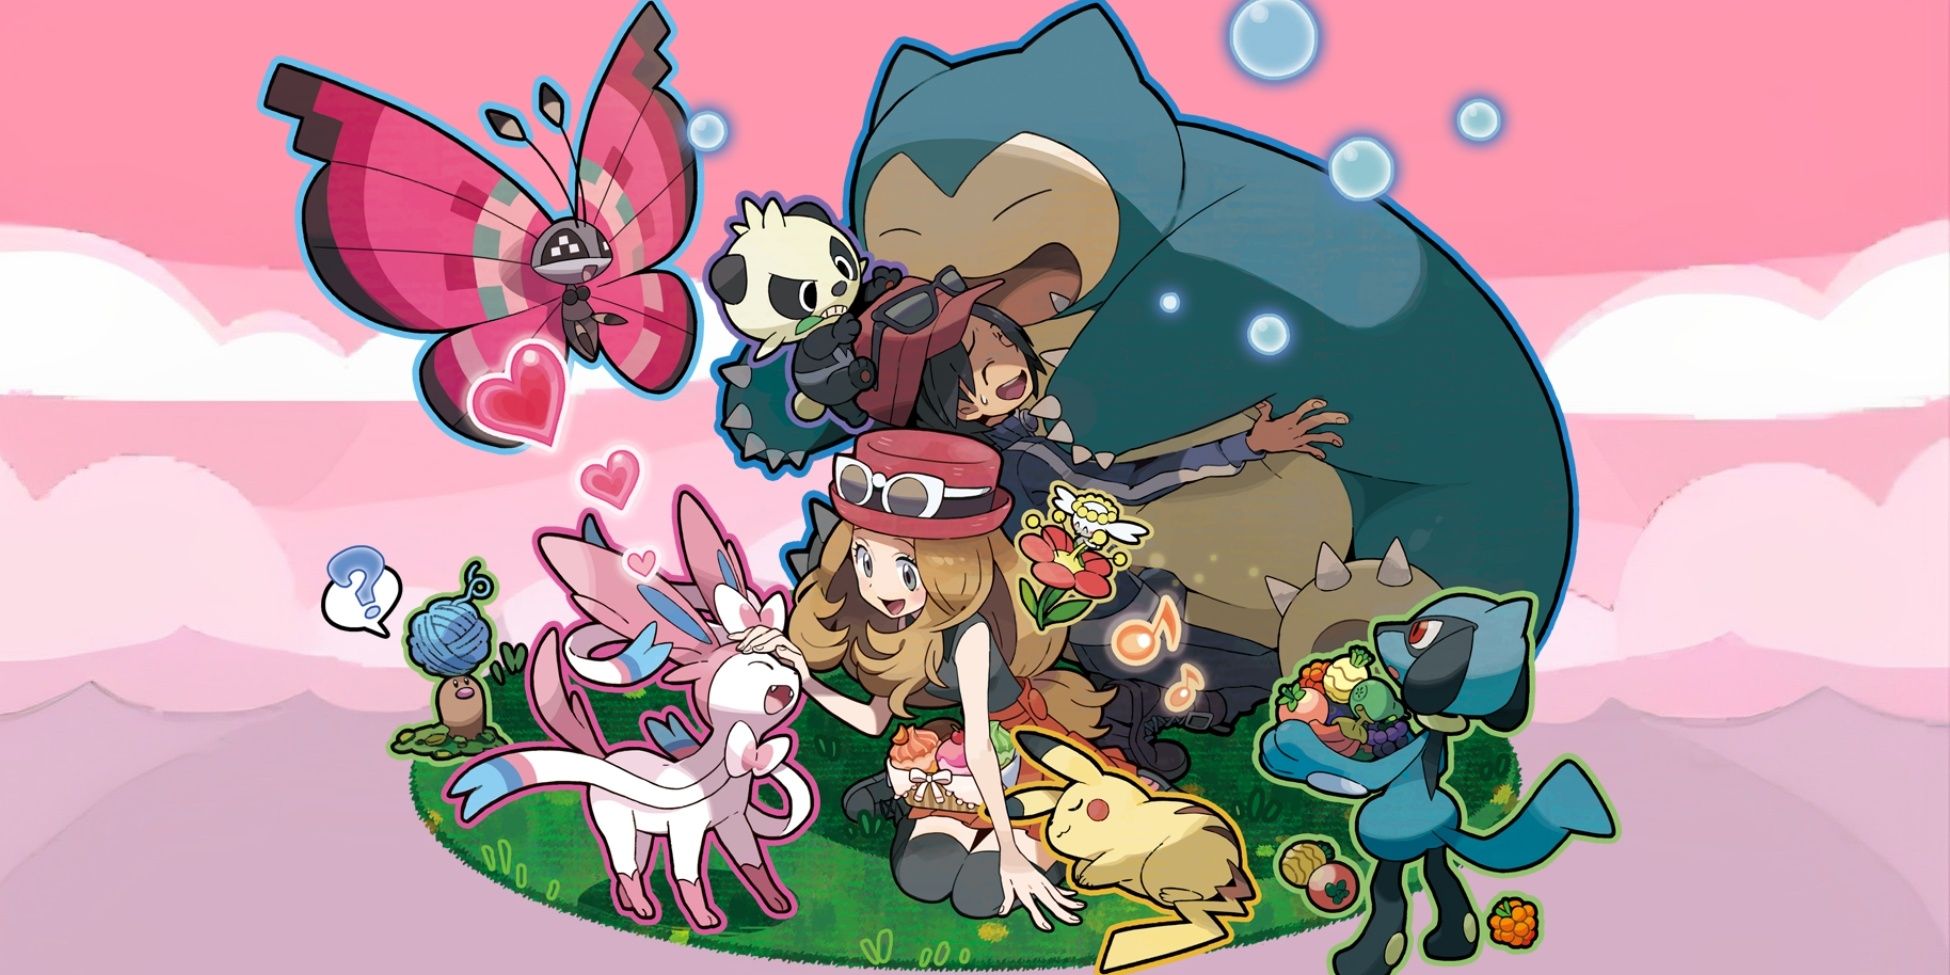 Serena and Calem playing with their pokemon in Poke Amie 